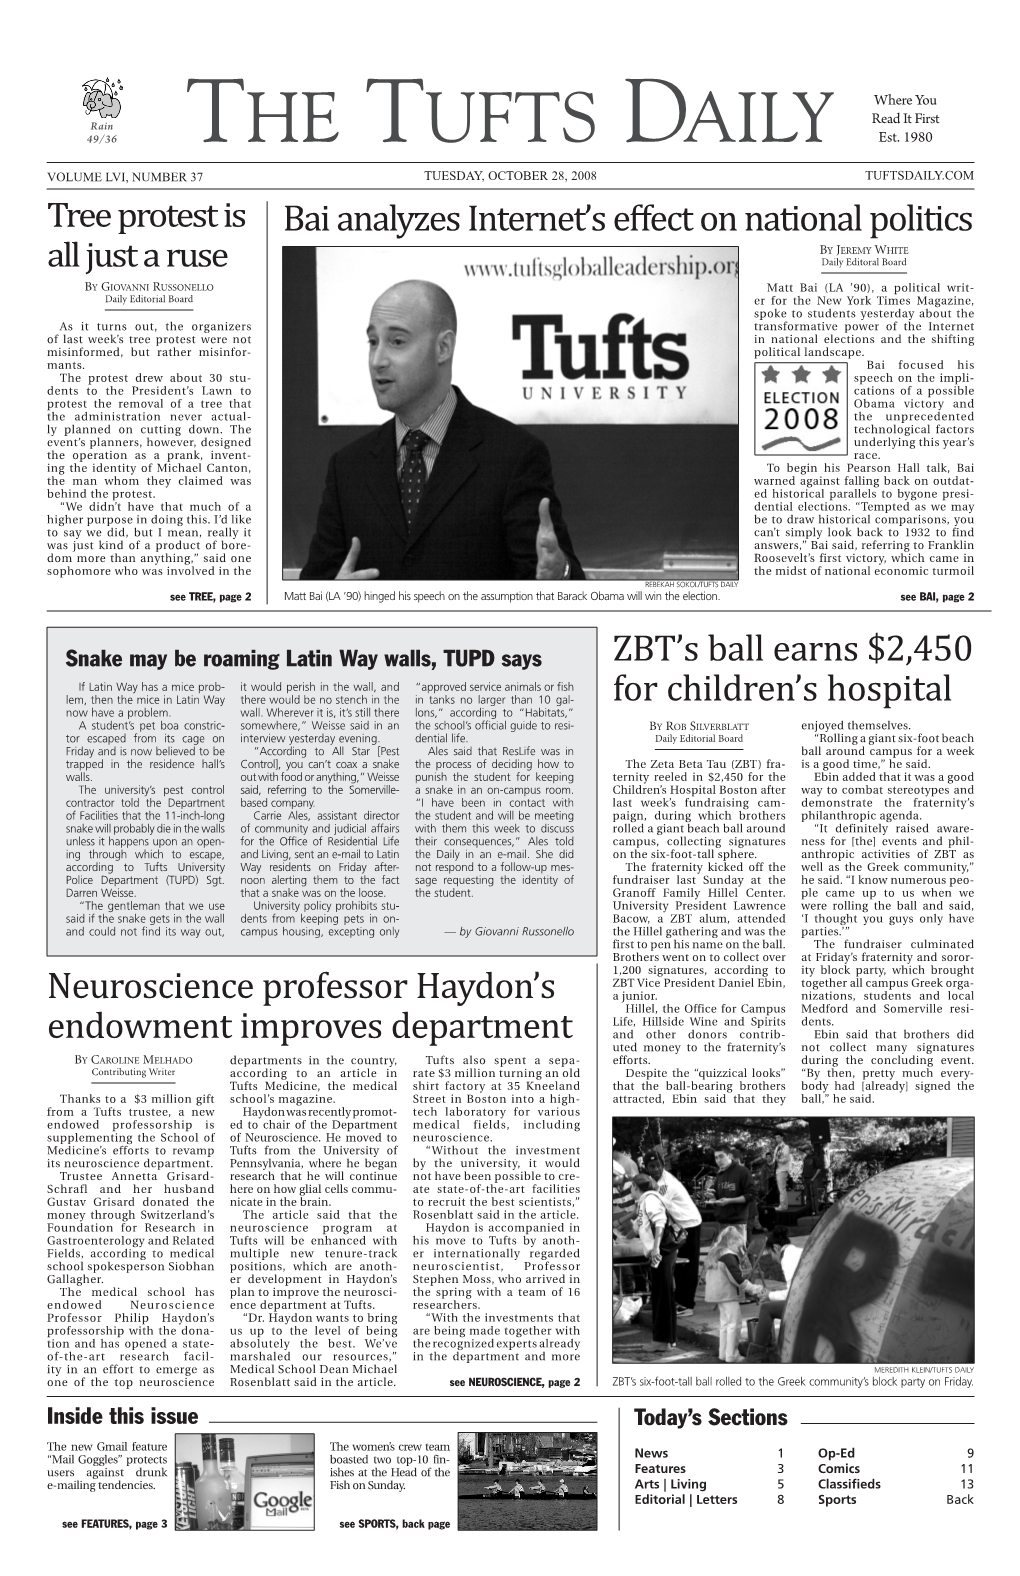 THE TUFTS DAILY Est